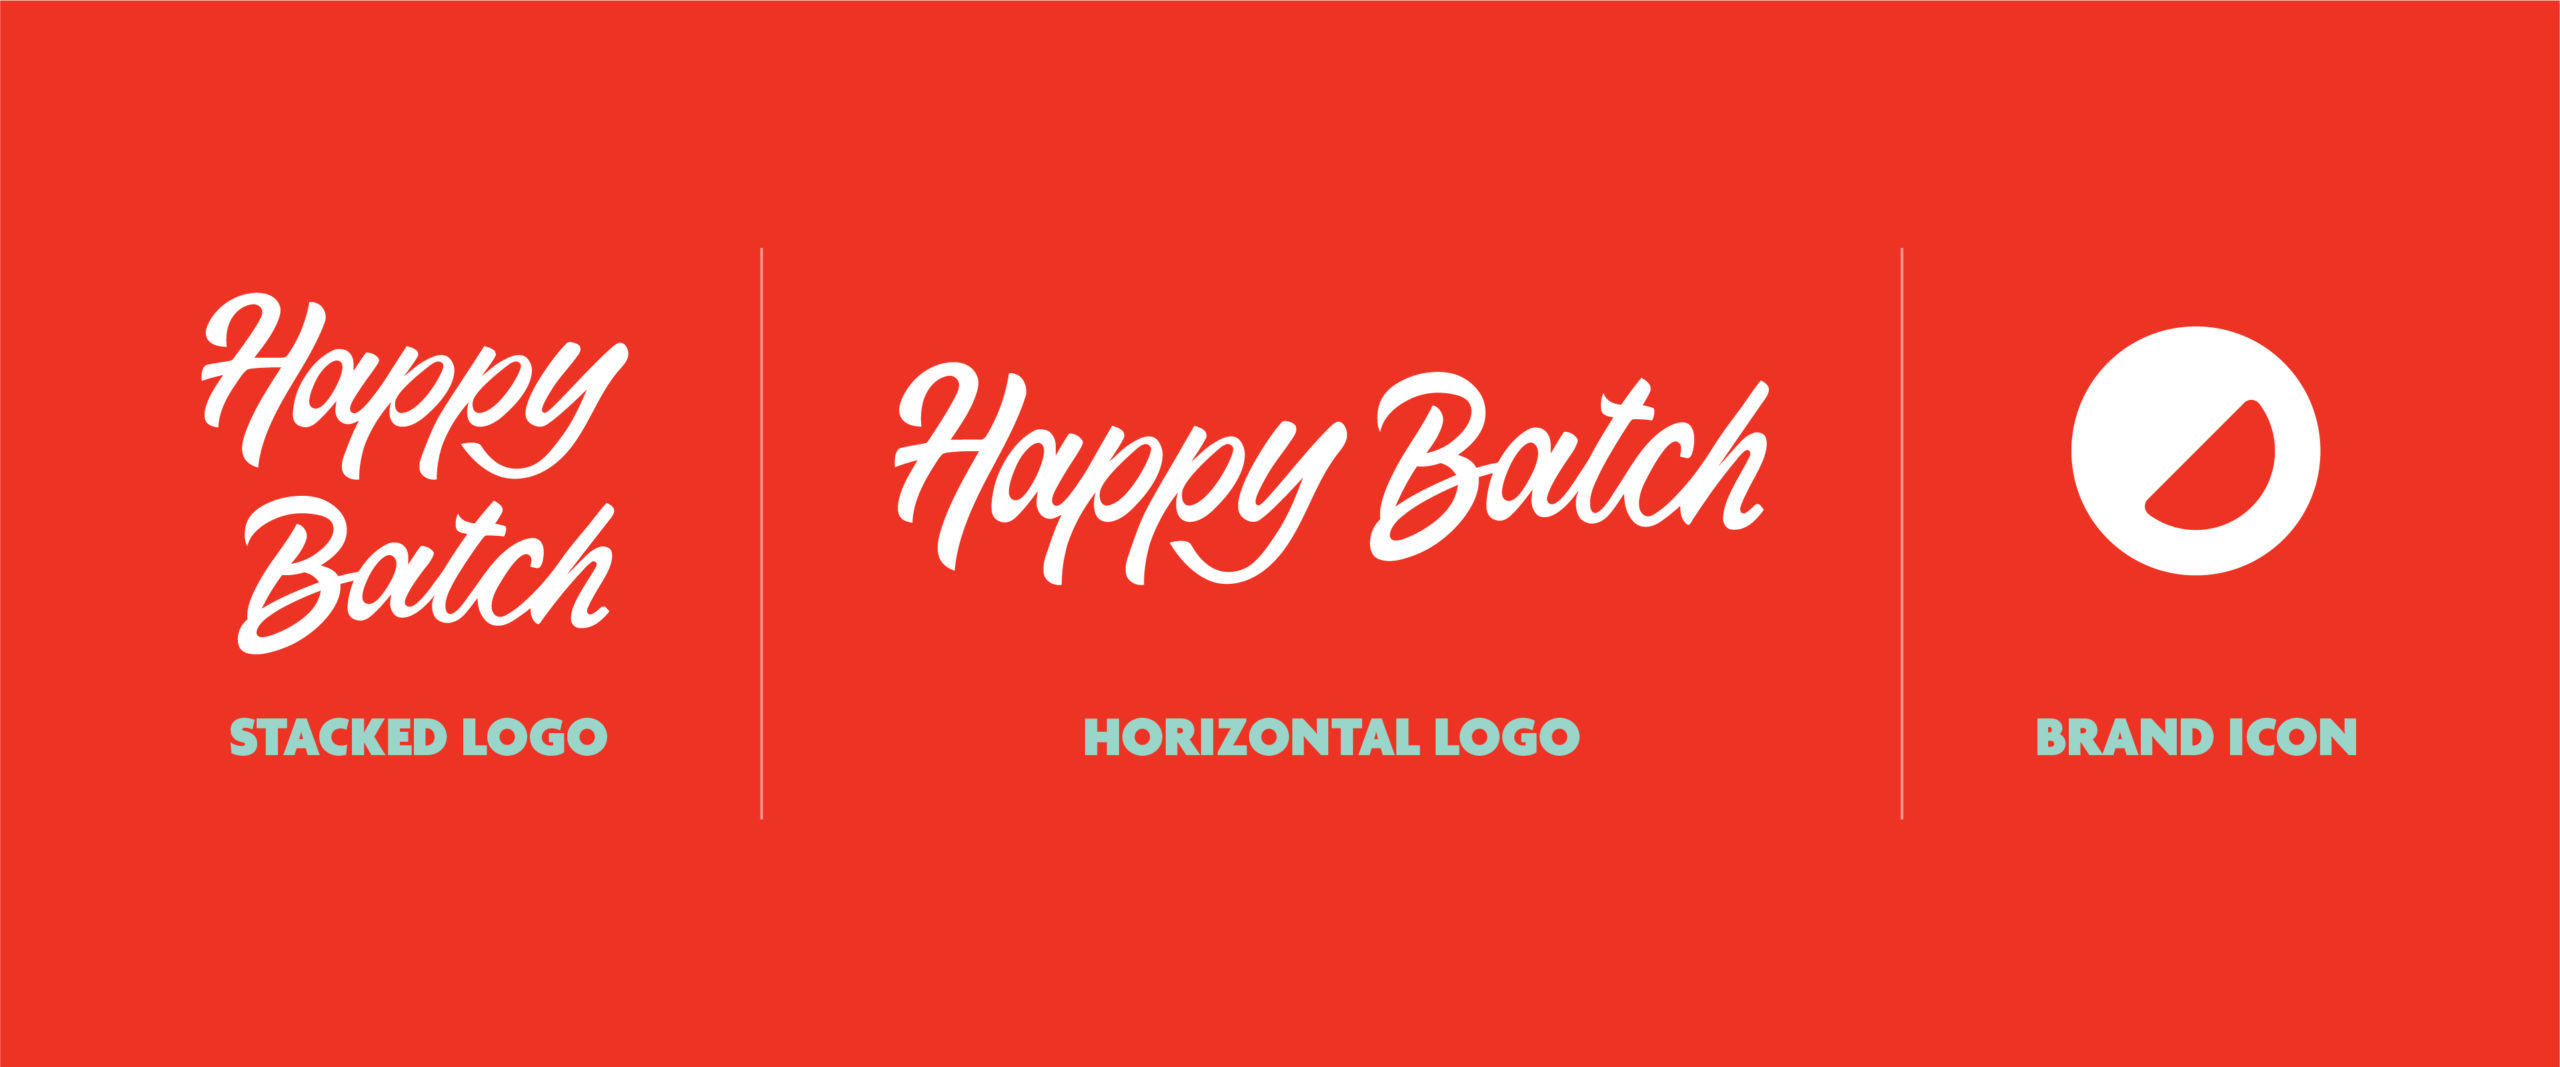 Happy Batch brand identity with logo, stacked logo and brand element